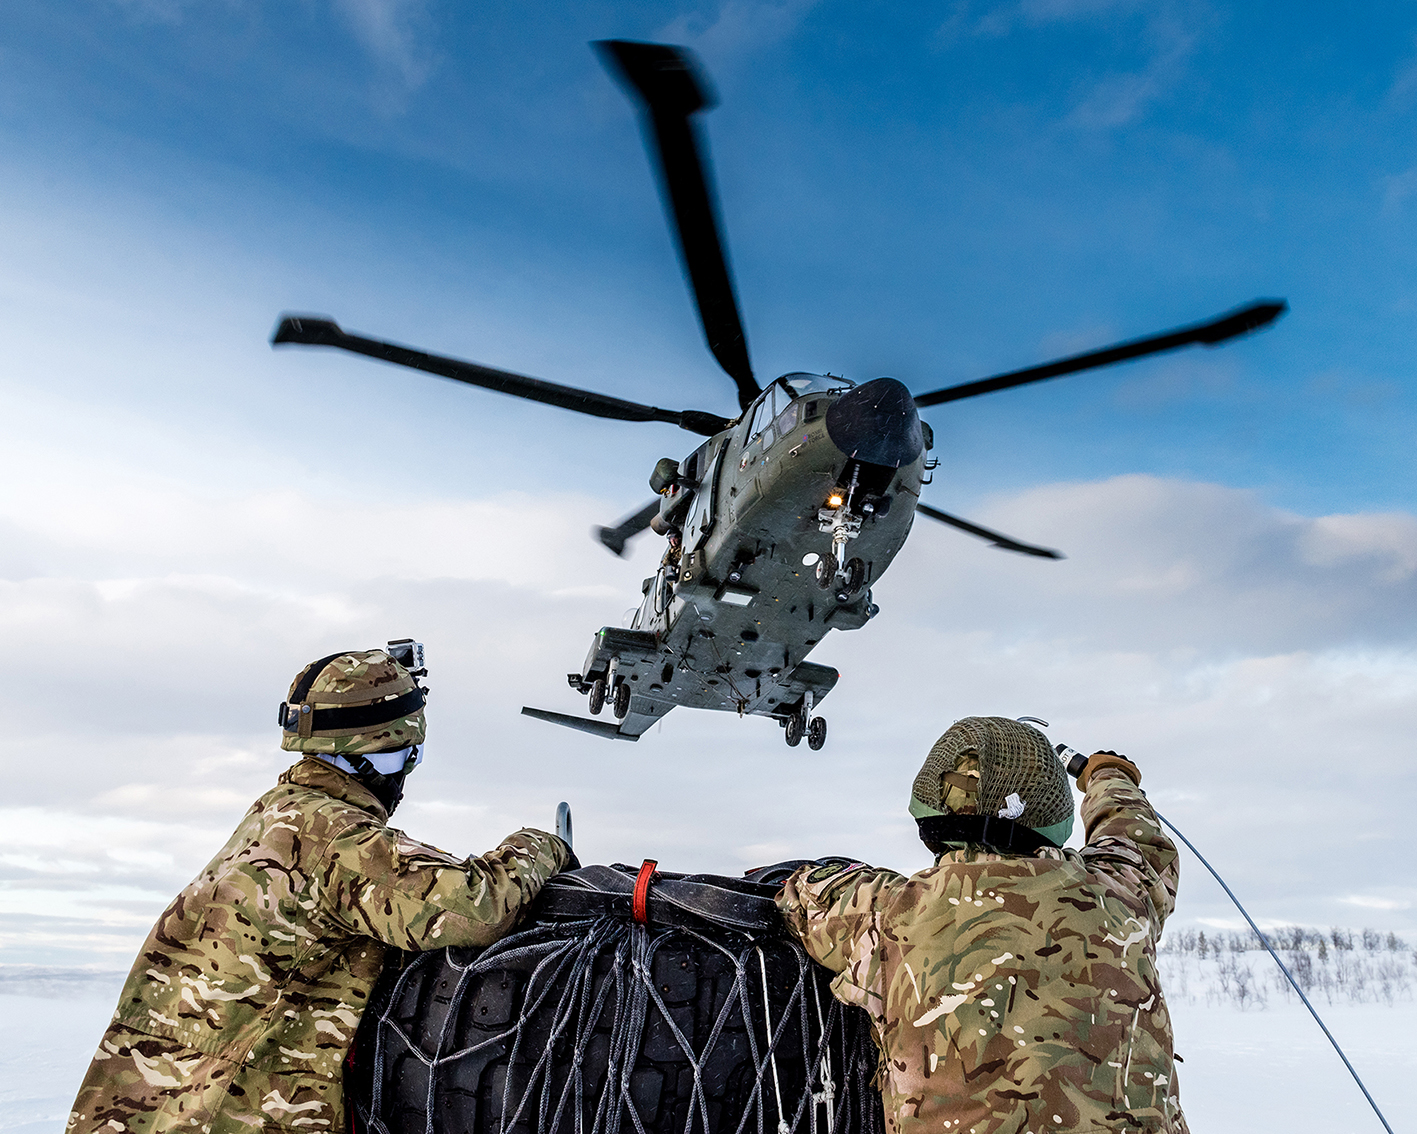 Image shows aviators tending to cargo load with helicopter taking off in snowy environment.